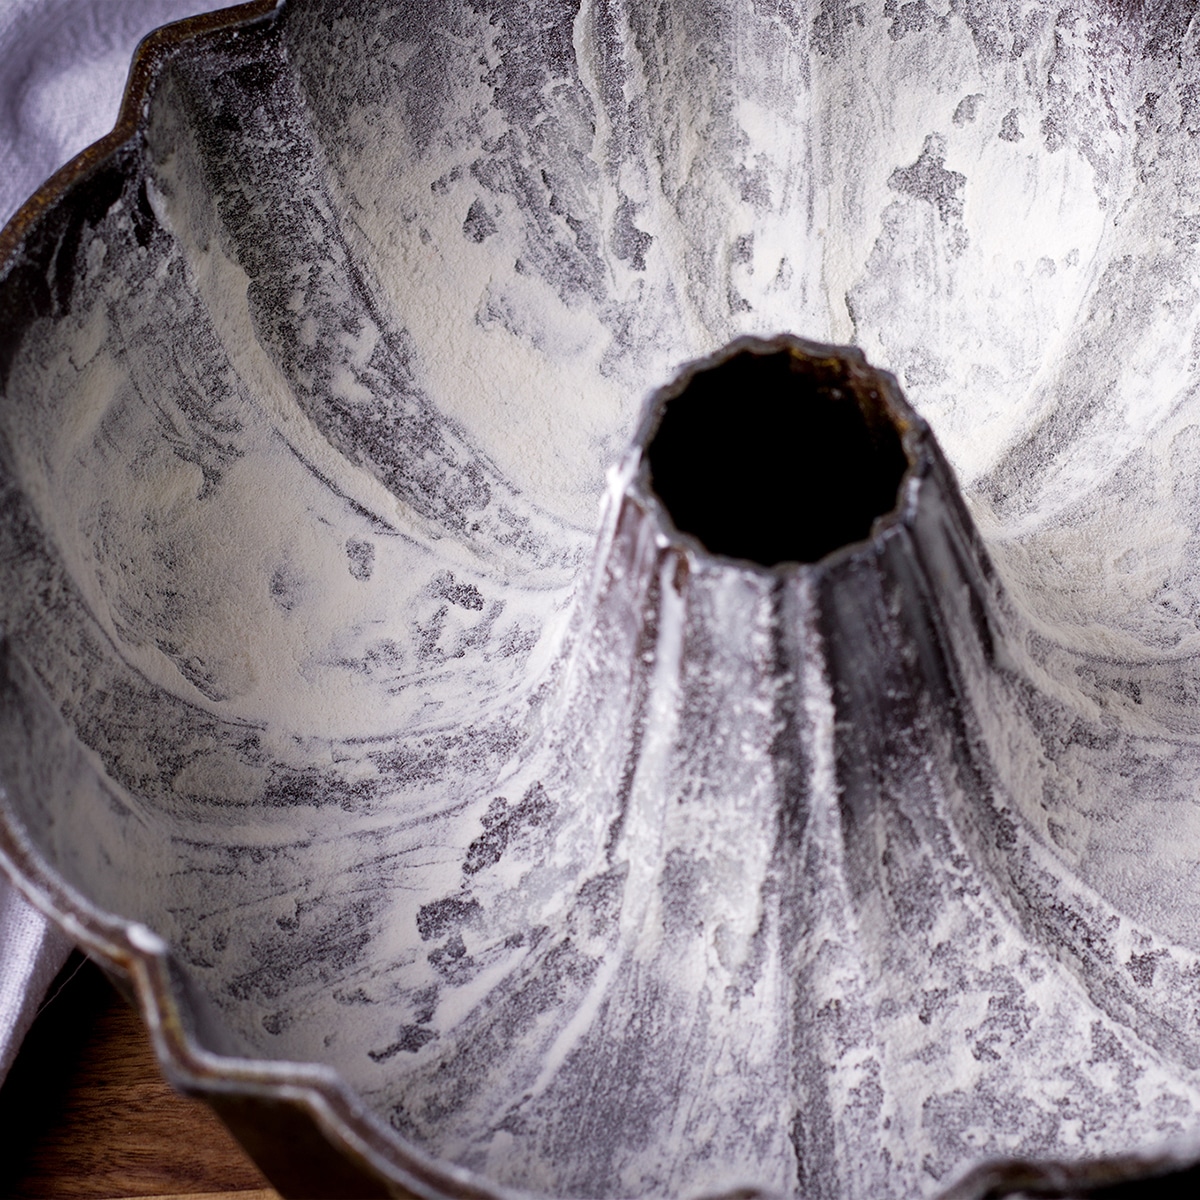 Looking down into a bundt pan that's been coated with butter and flour.